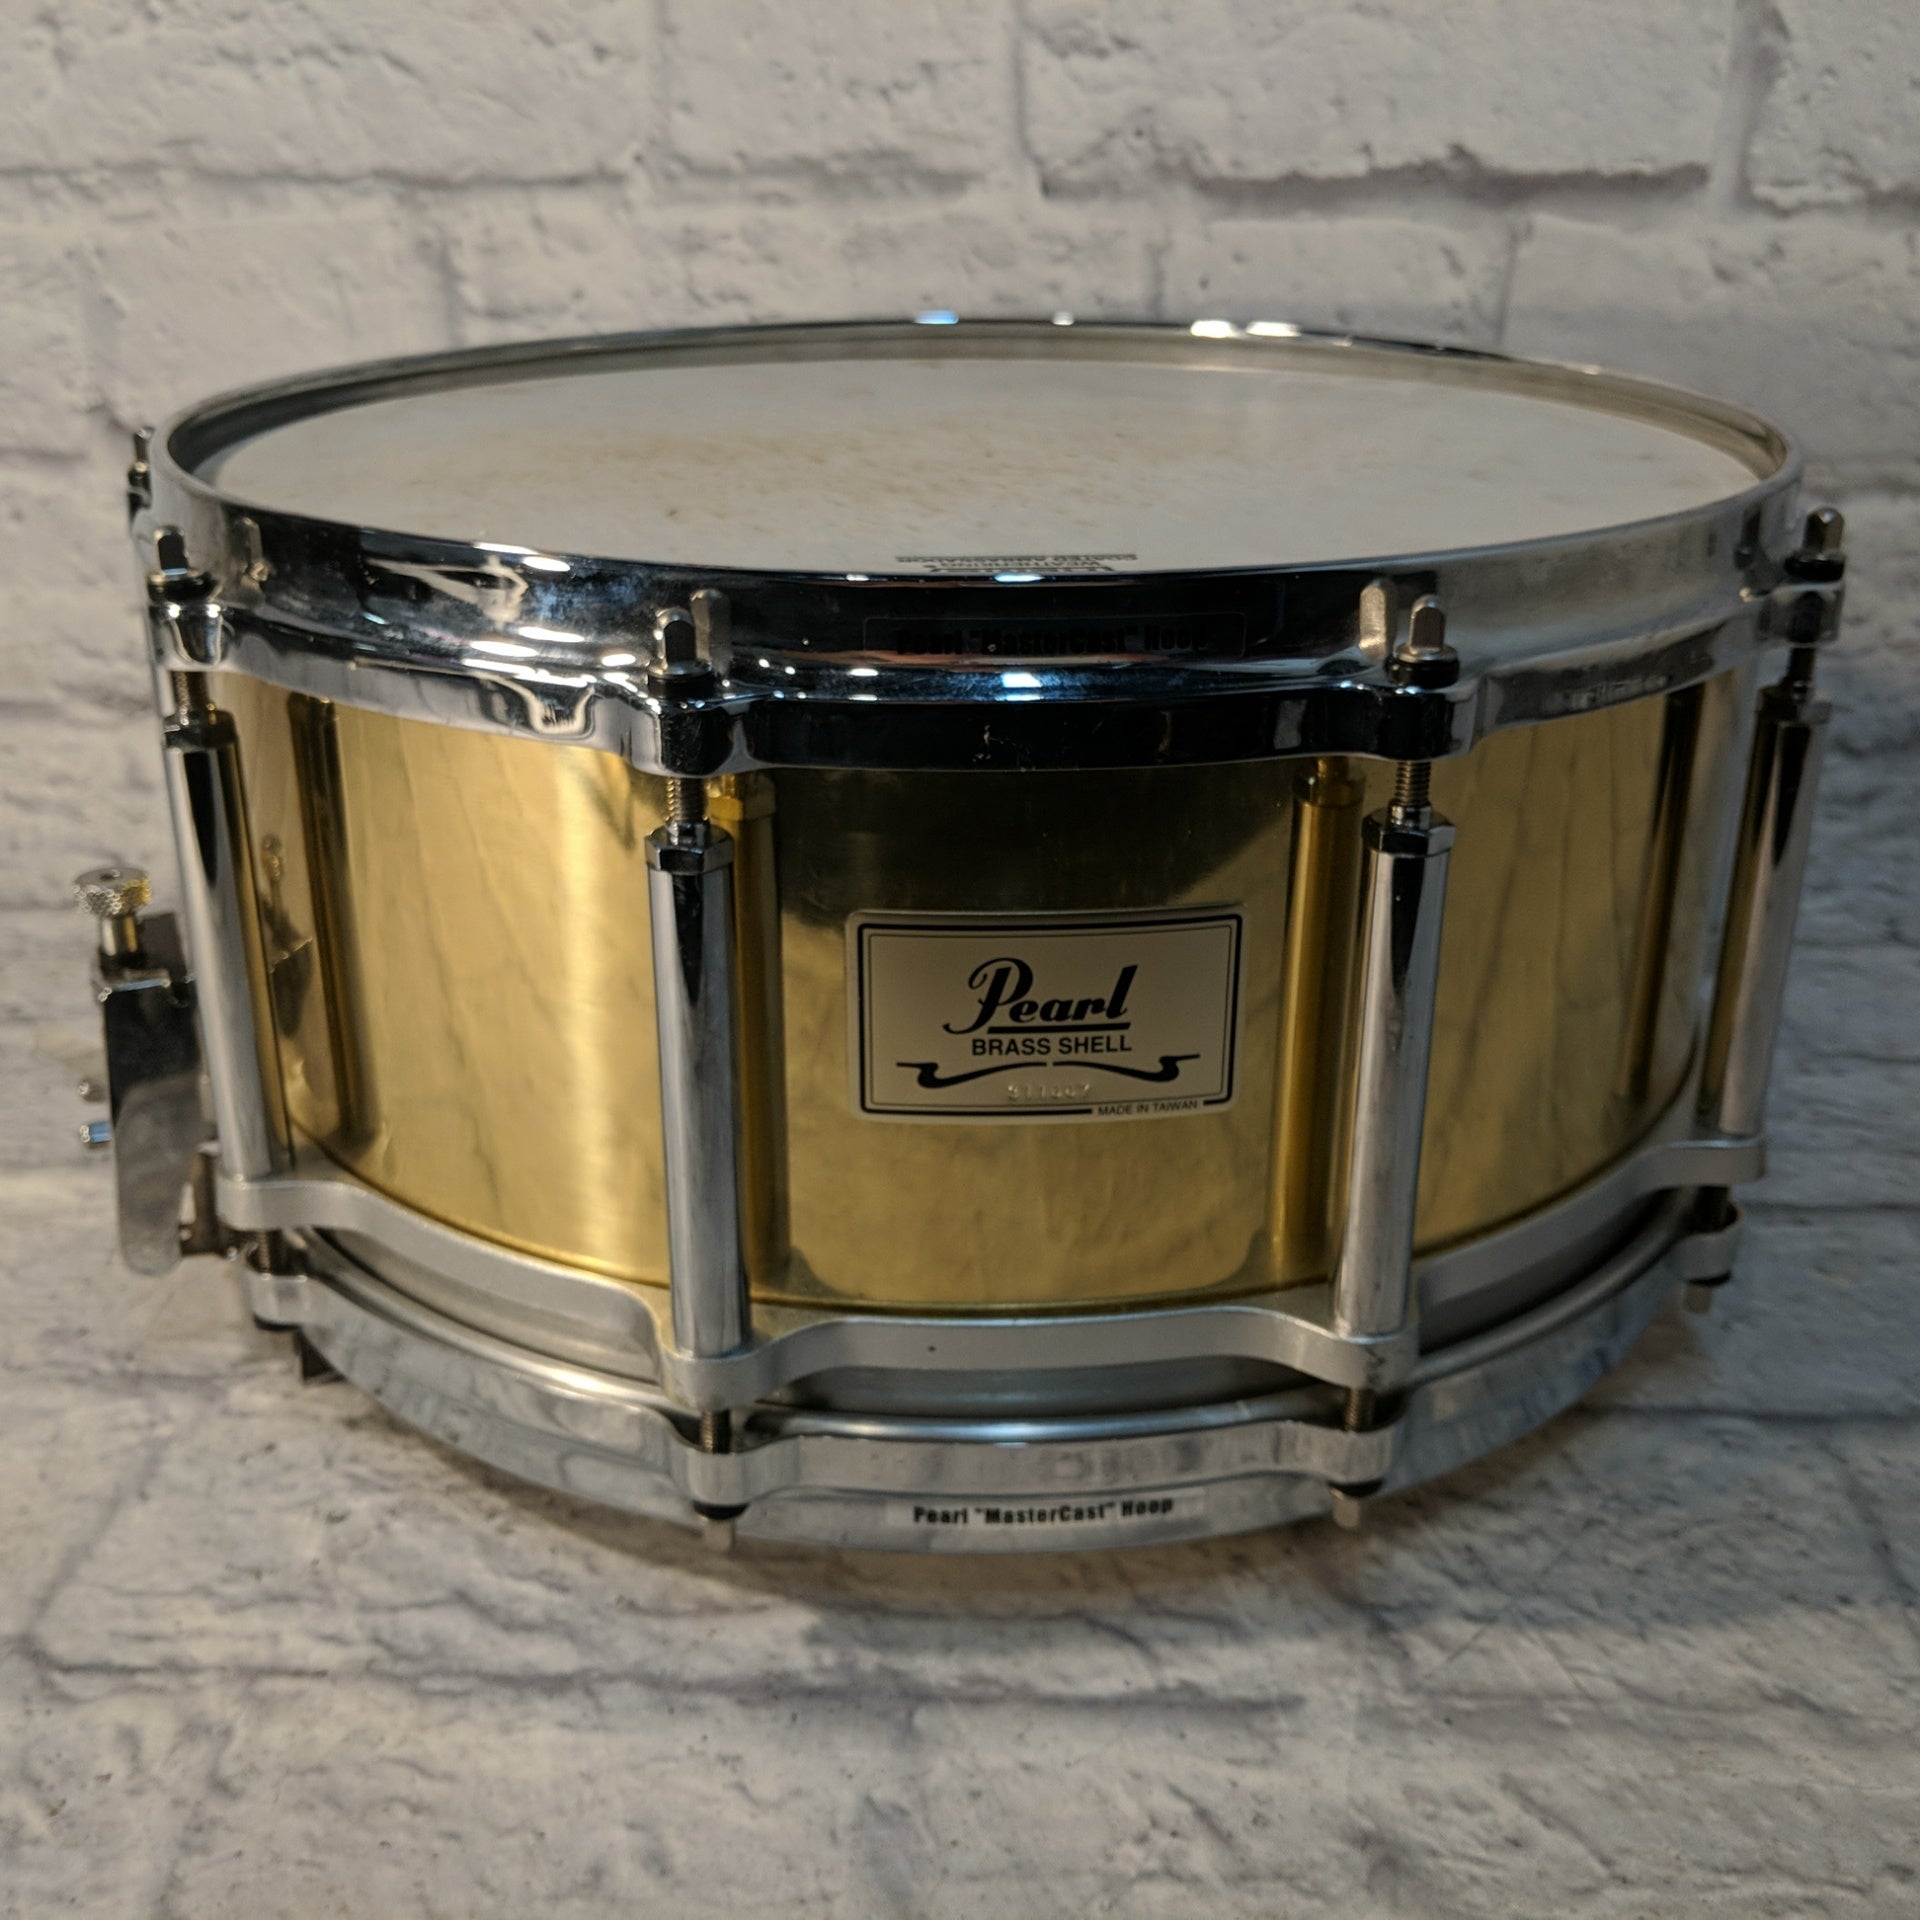 Pearl Brass Shell Free Floating 14x6.5 Snare Drum, Marty Spitzer